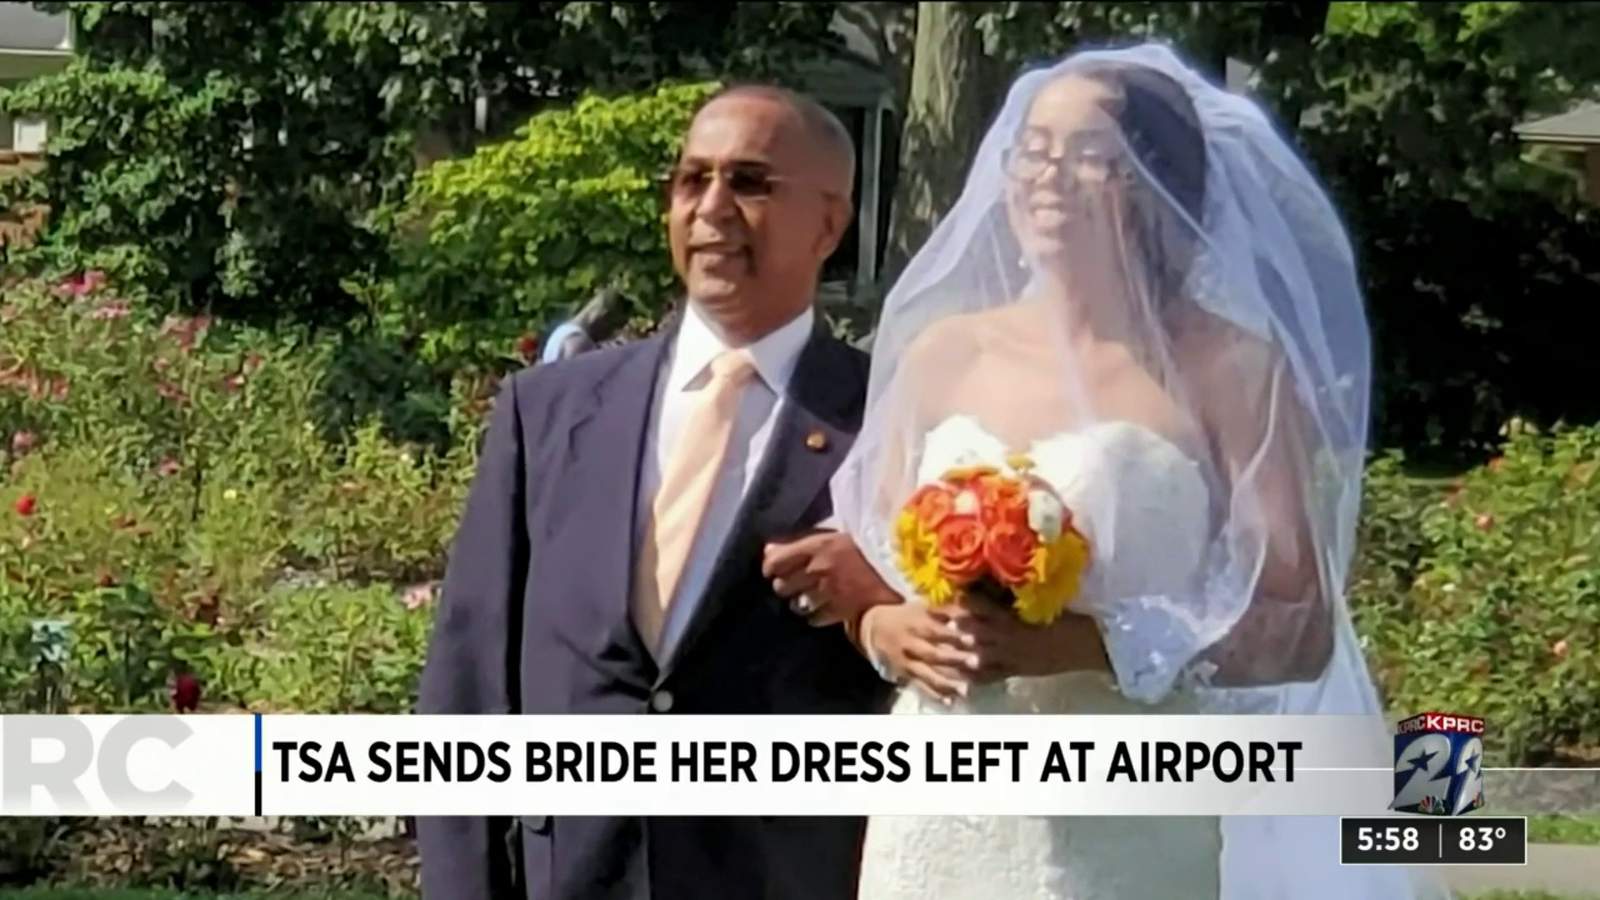 One Good Thing: TSA sends bride her dress left at airport in time for her wedding the next day